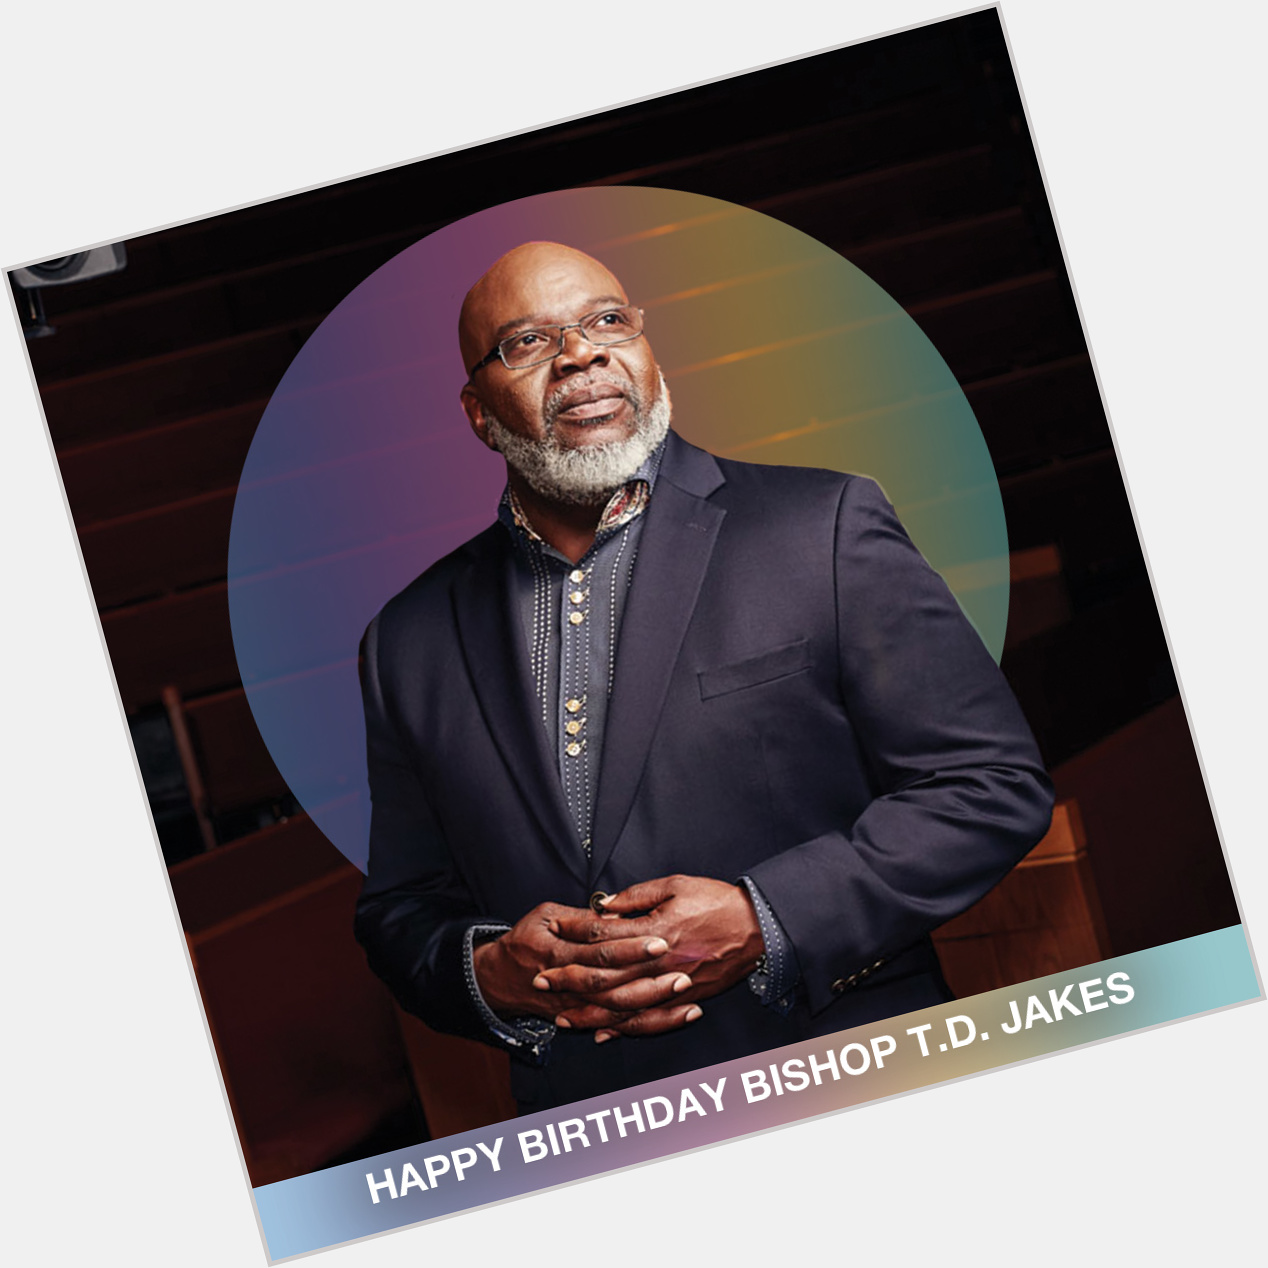 Happy Birthday to Bishop T.D. Jakes from Brother Toiriste, Bishop Rosie O\neal, and the entire KCC Family. 